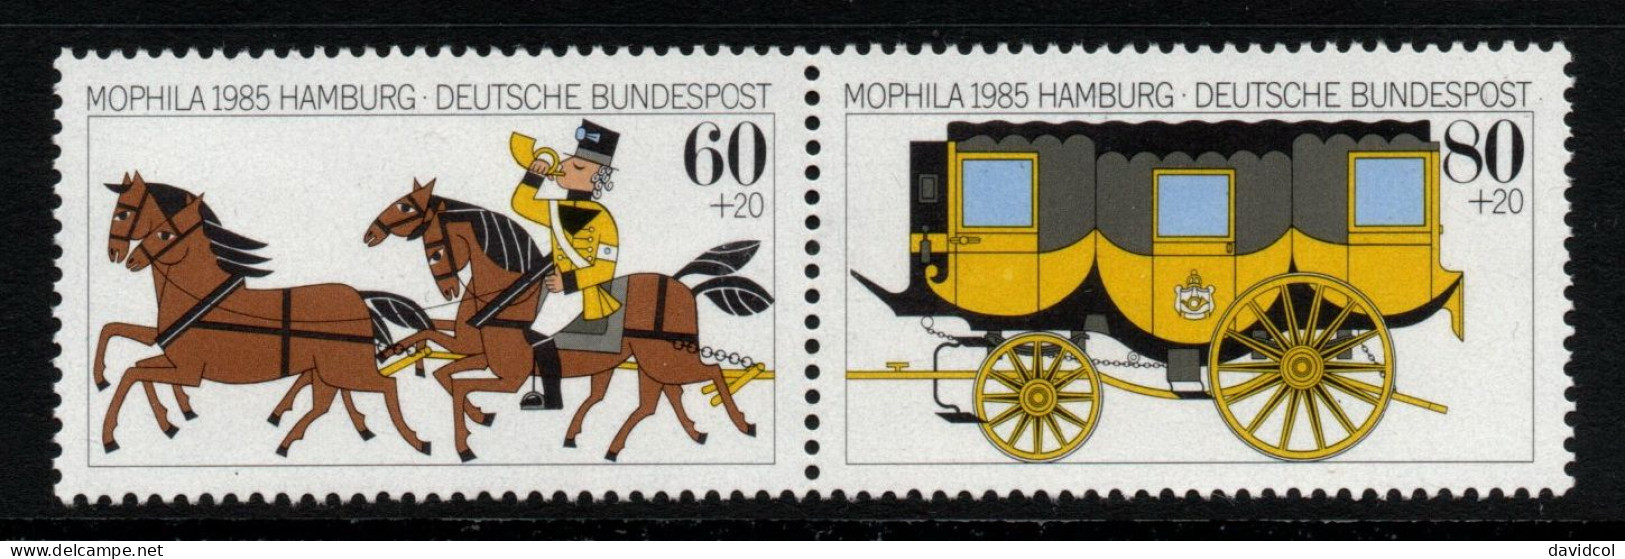 2738 -.GERMANY - 1985 - MI#:1255-1256 - MNH - COACH HORSES AND STAGECOACH - Diligences